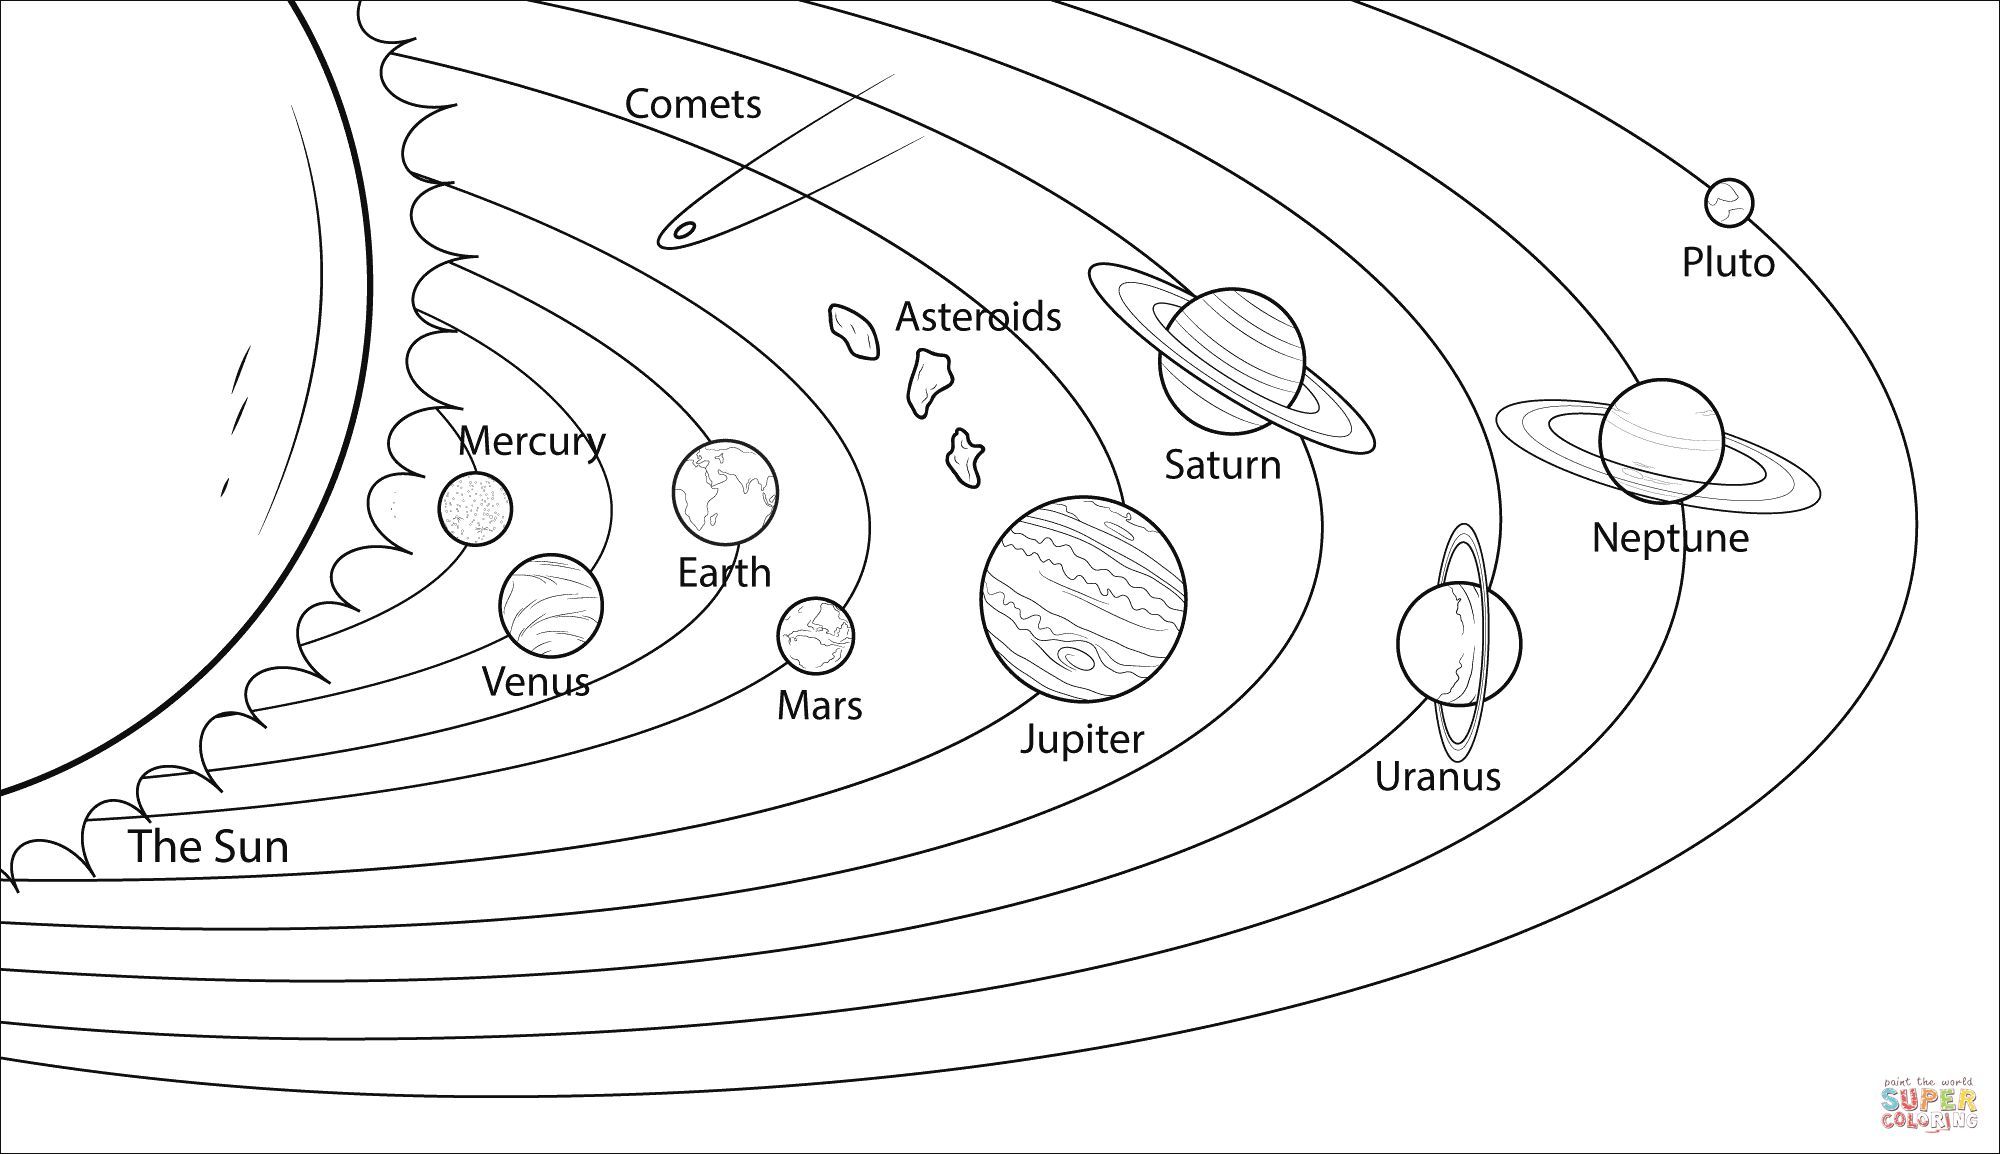 Printable Solar System Coloring Pages at GetDrawings ...
 Planets For Kids Printables